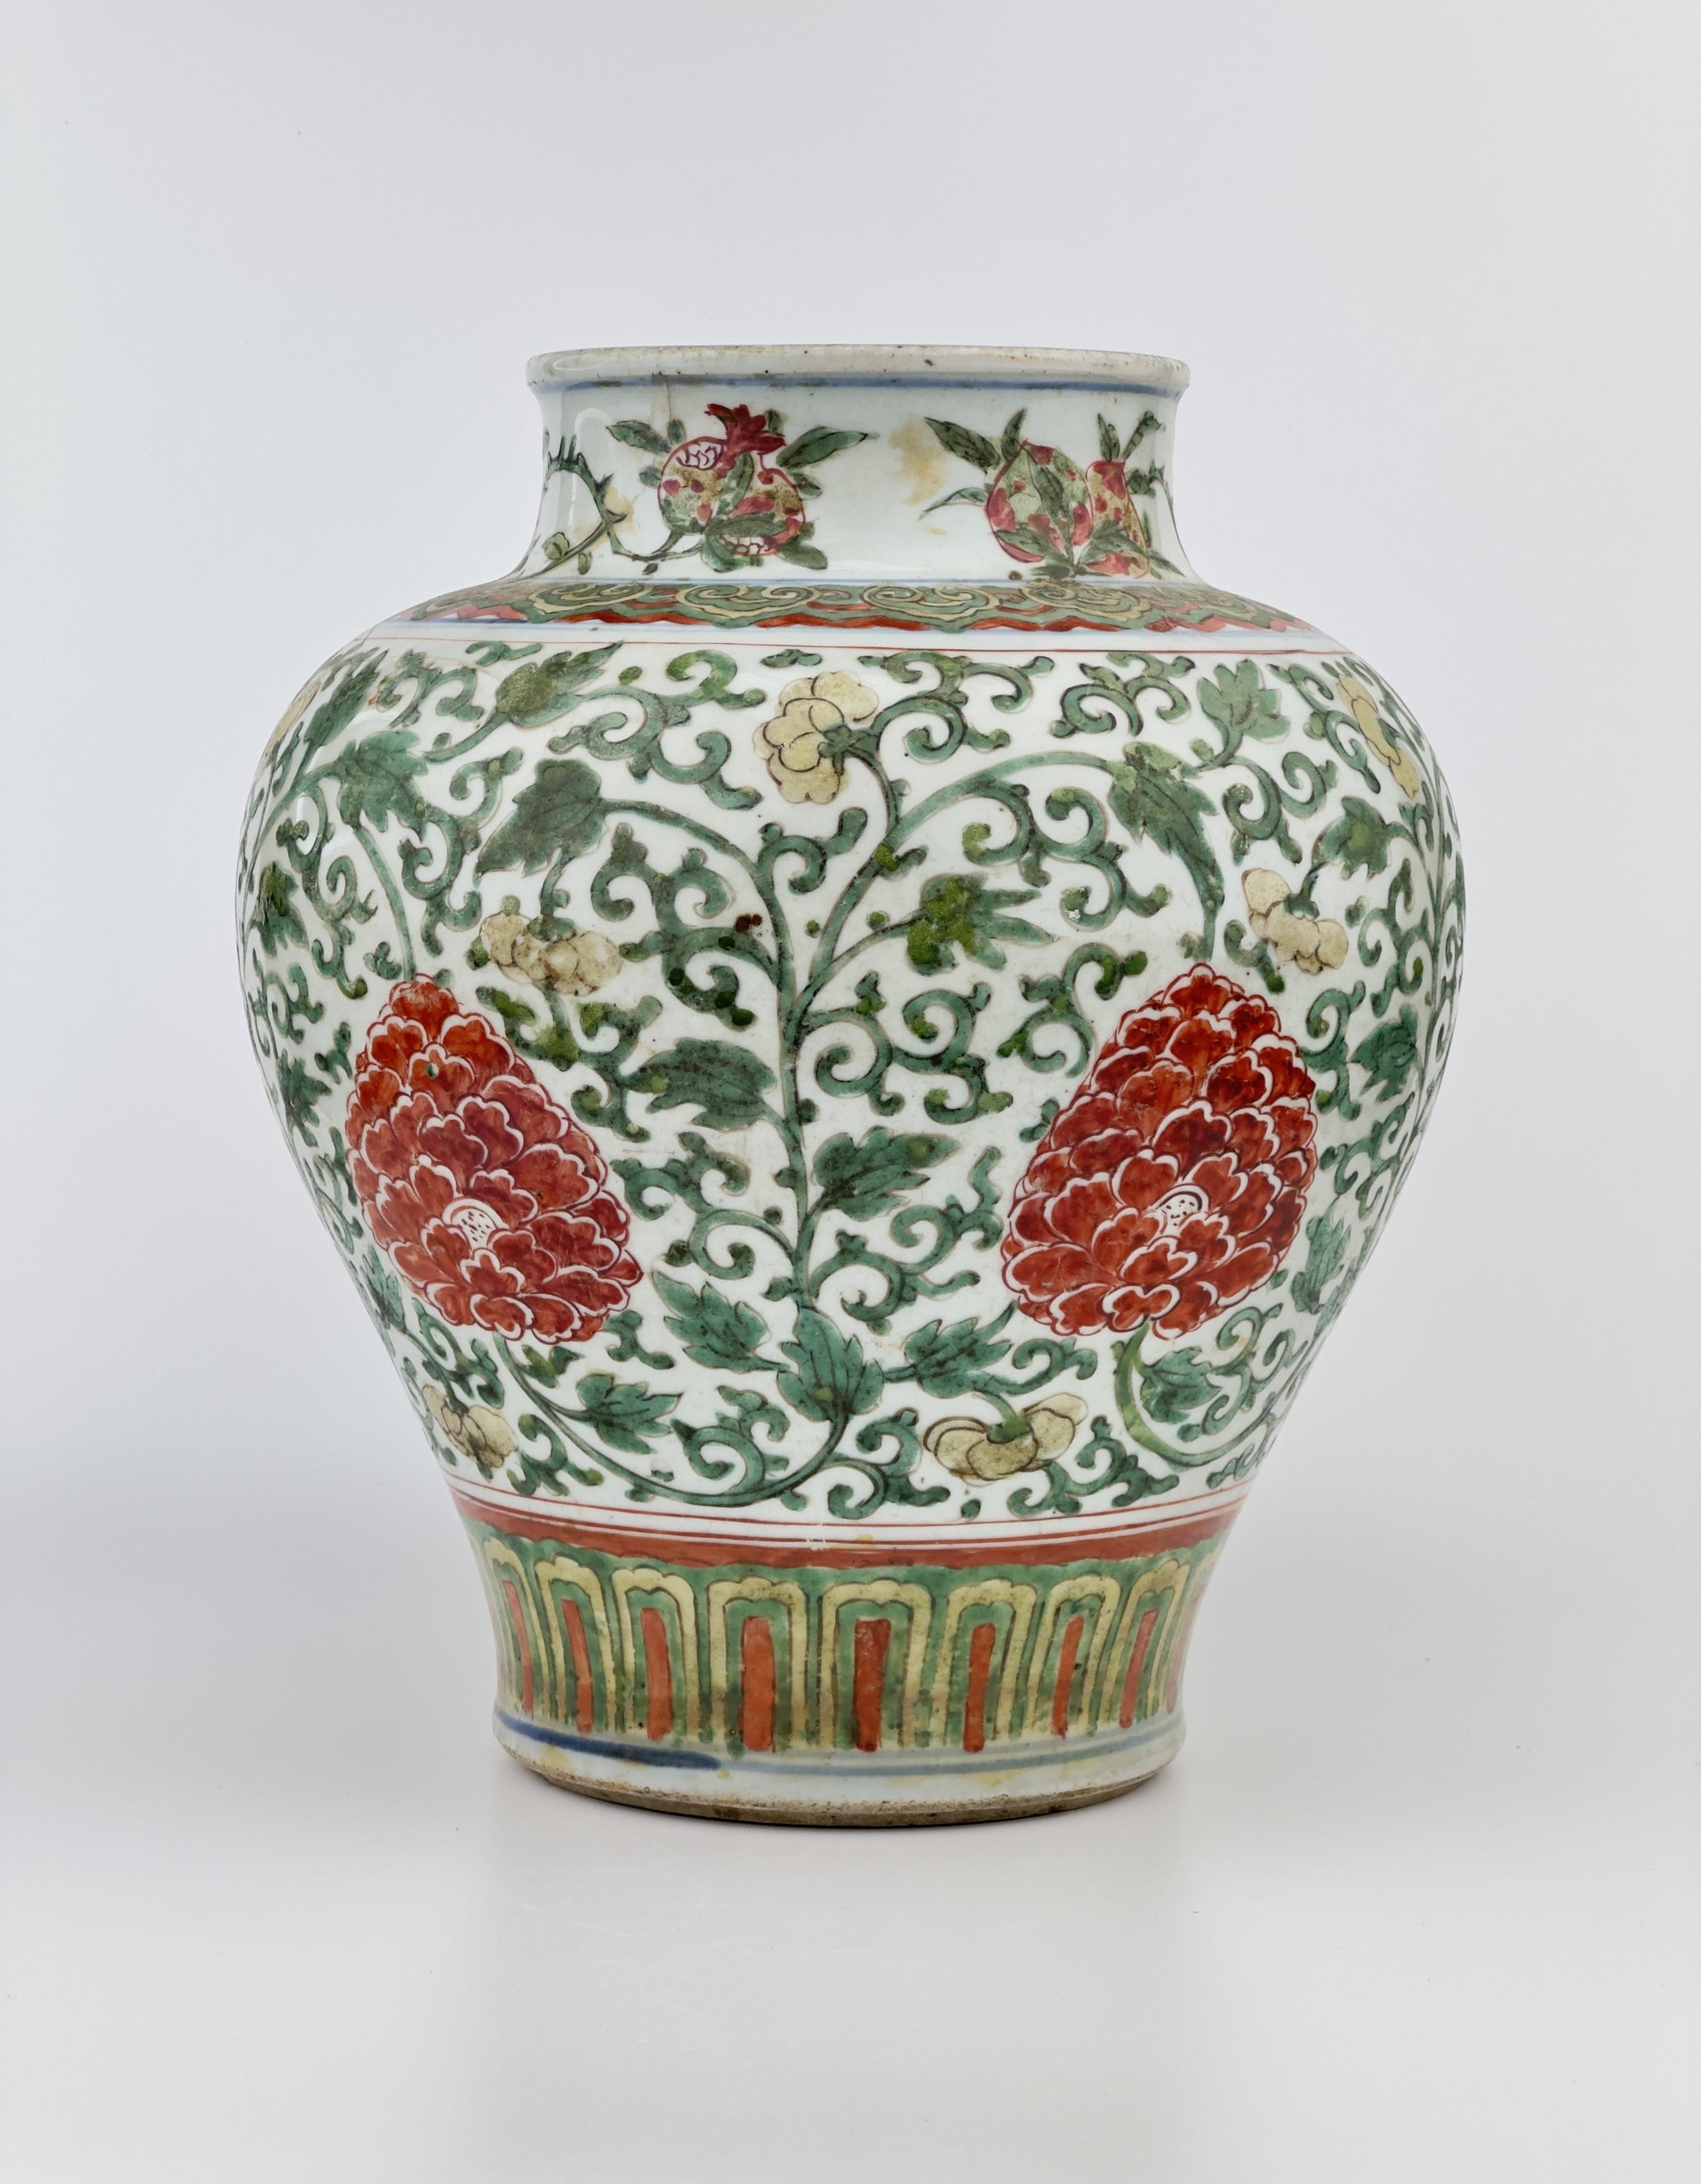 Chinese A Wucai 'Peony' Vase Transitional Period, 17th century, Early Qing Dynasty For Sale